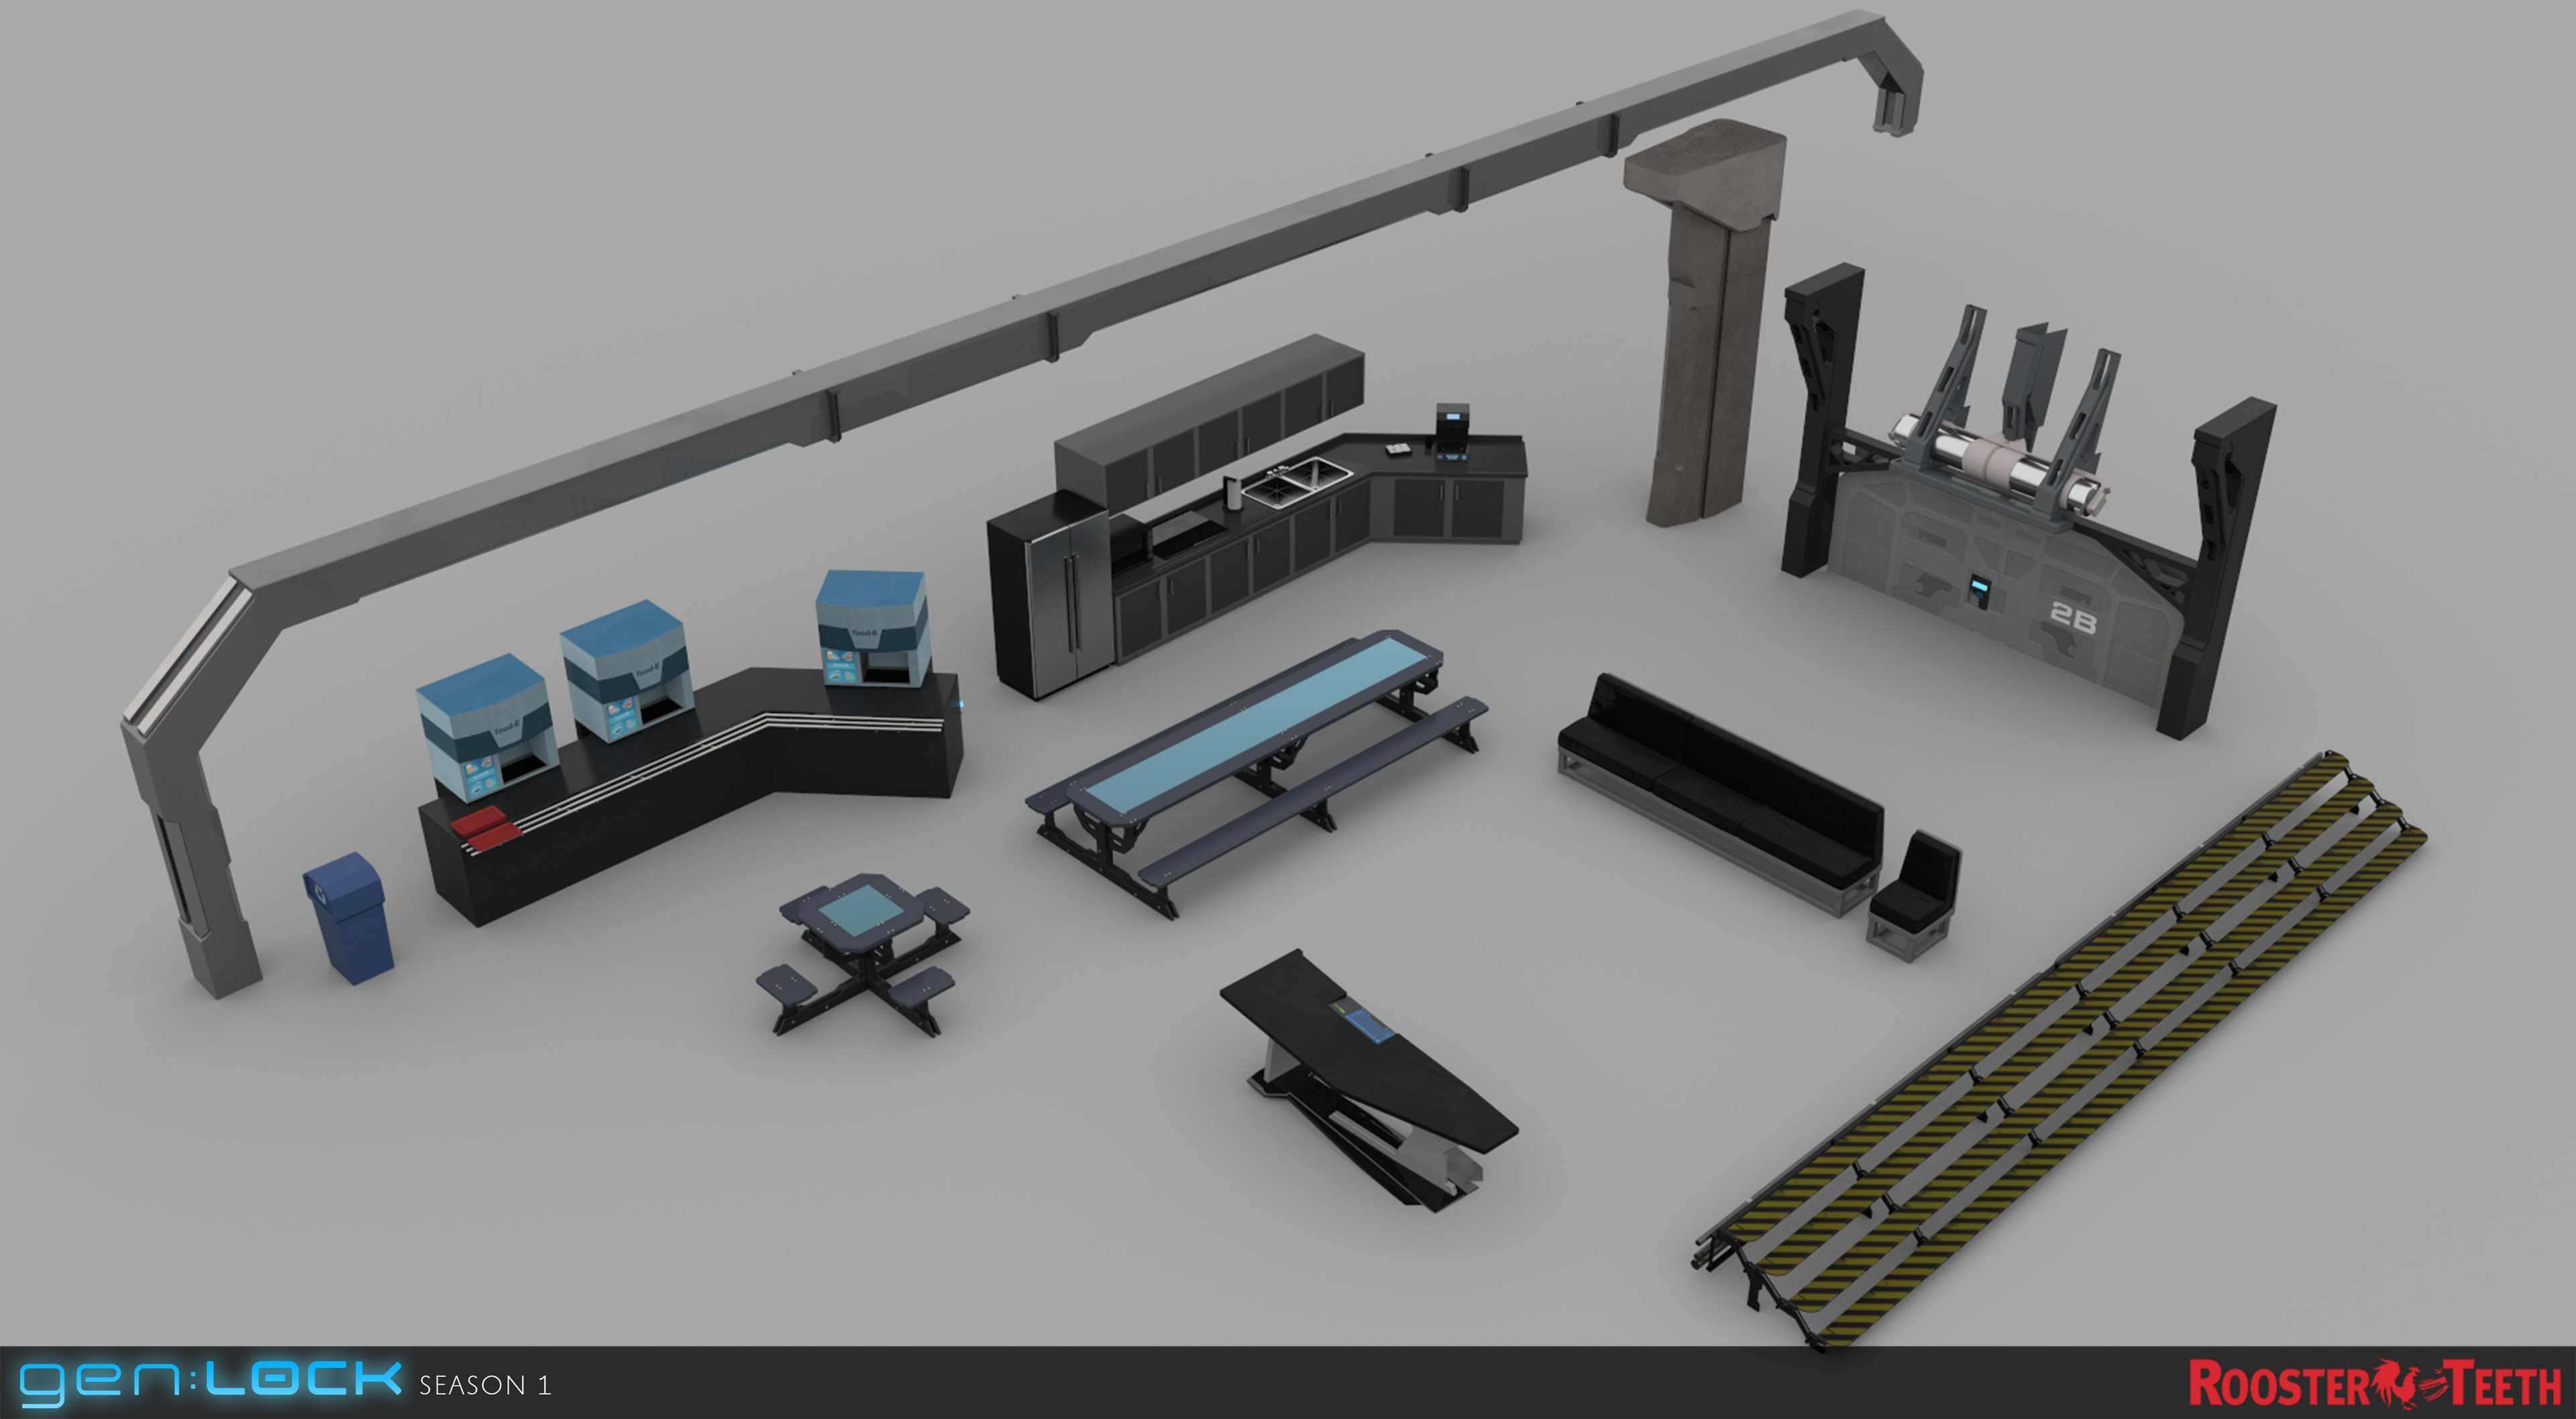 Some of the common area props I modeled and textured.